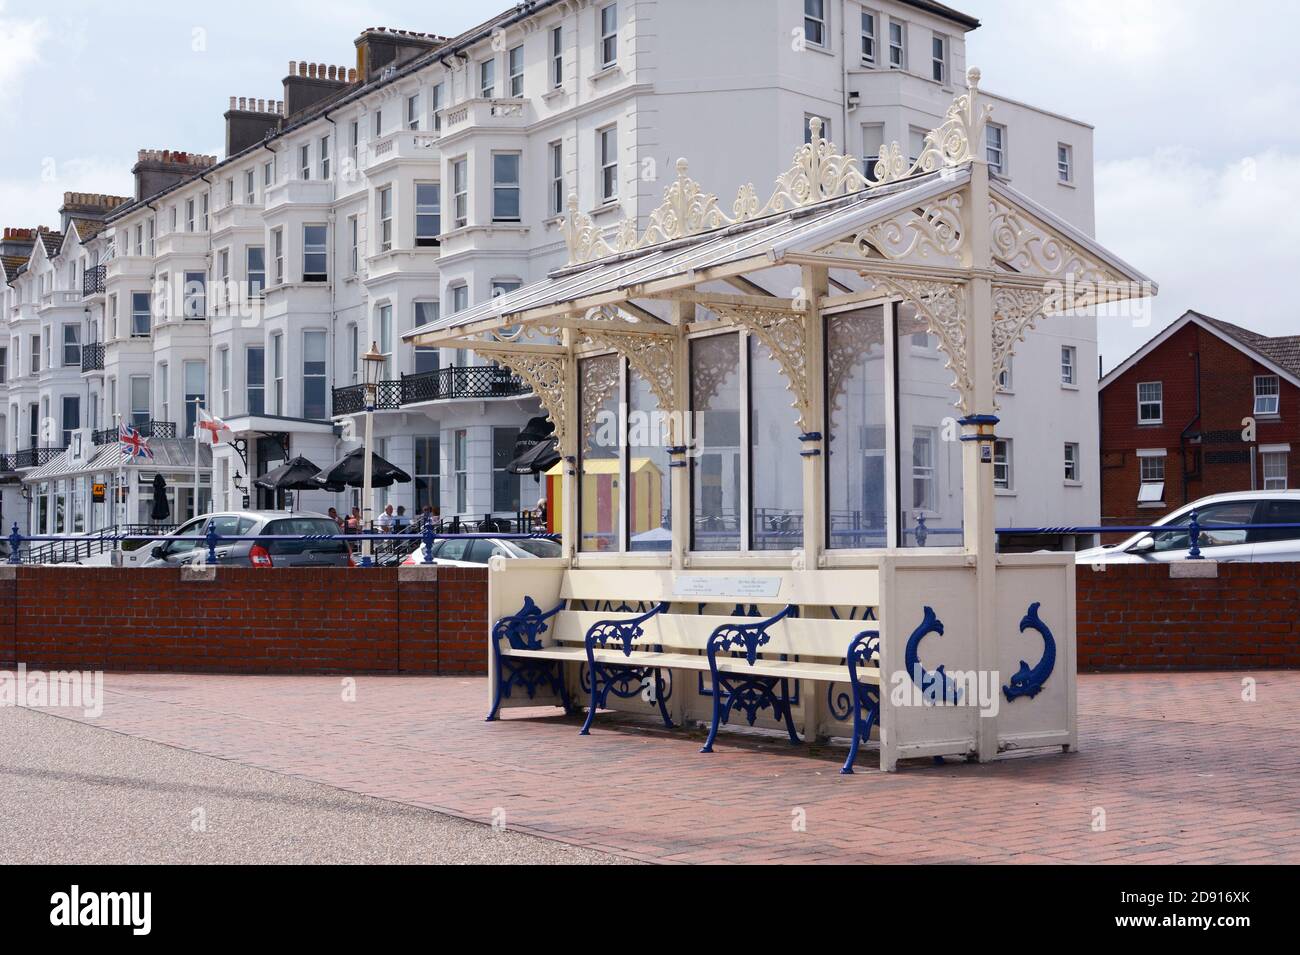 EASTBOURNE, UK - AUGUST 28, 2019: Ornate sheltered bench on Royal Parade in the seaside town of Eastbourne, England on August 28, 2019 Stock Photo